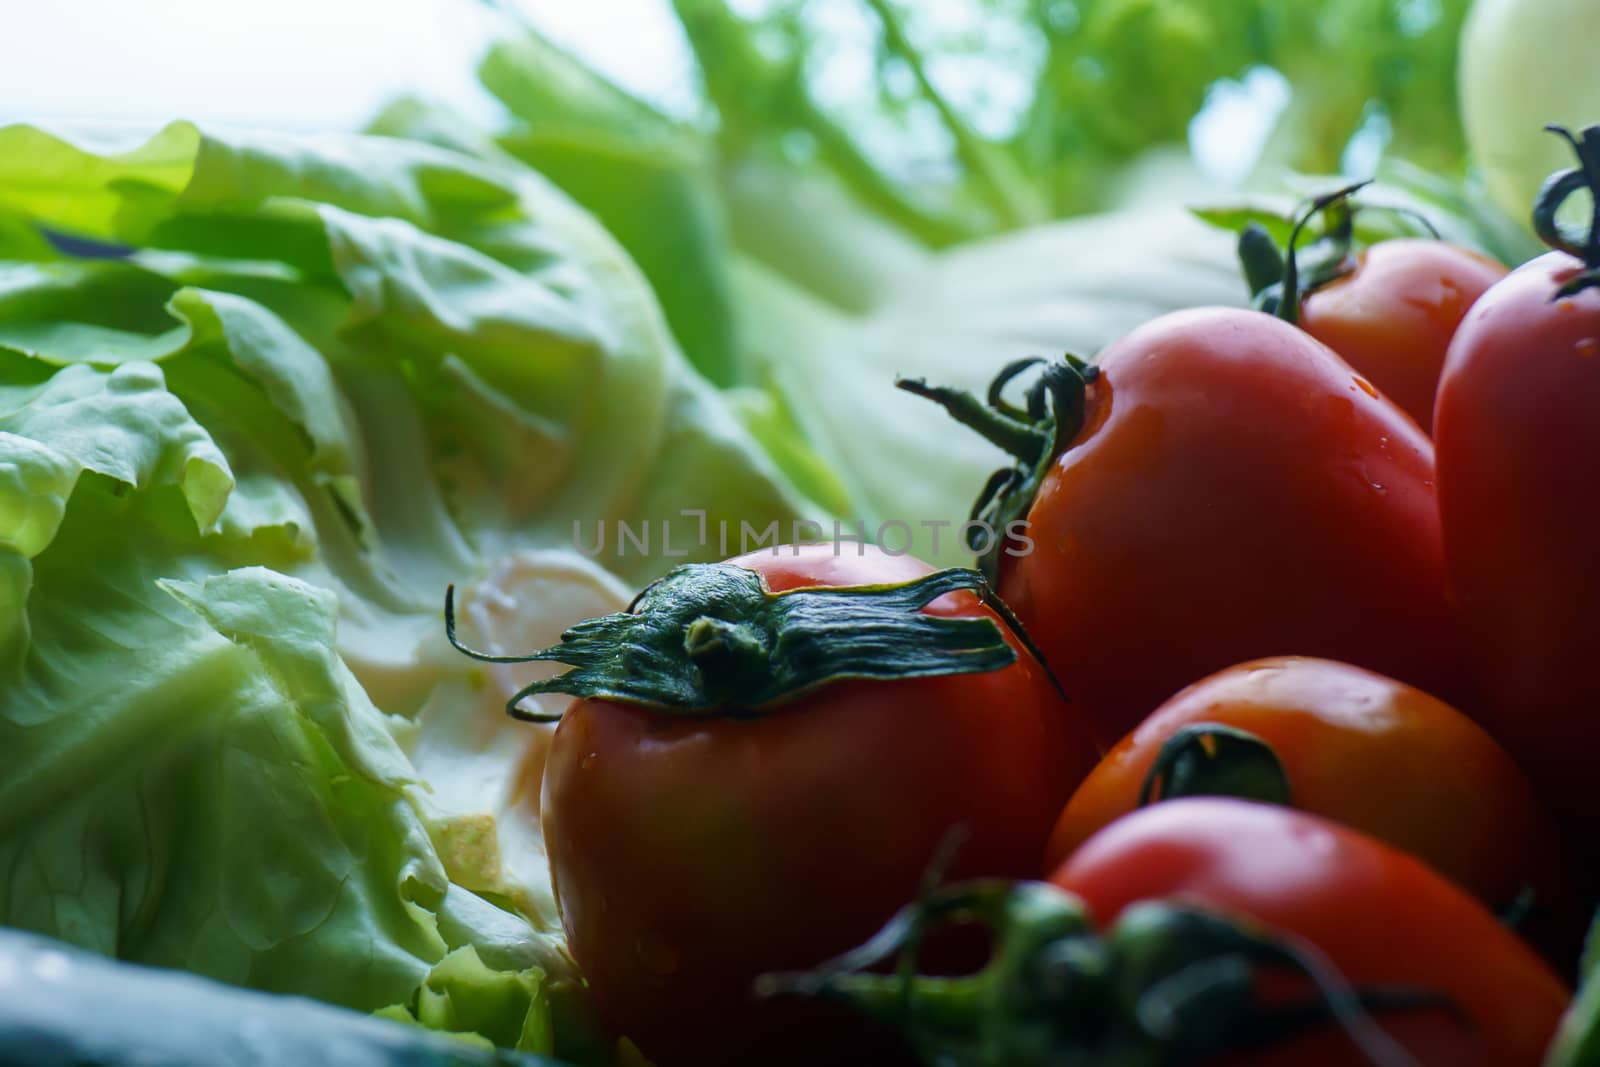 Healthy nutrition with fresh raw vegetables: close up detail of a tomato in the foreground on green vegetables in background bokeh effect